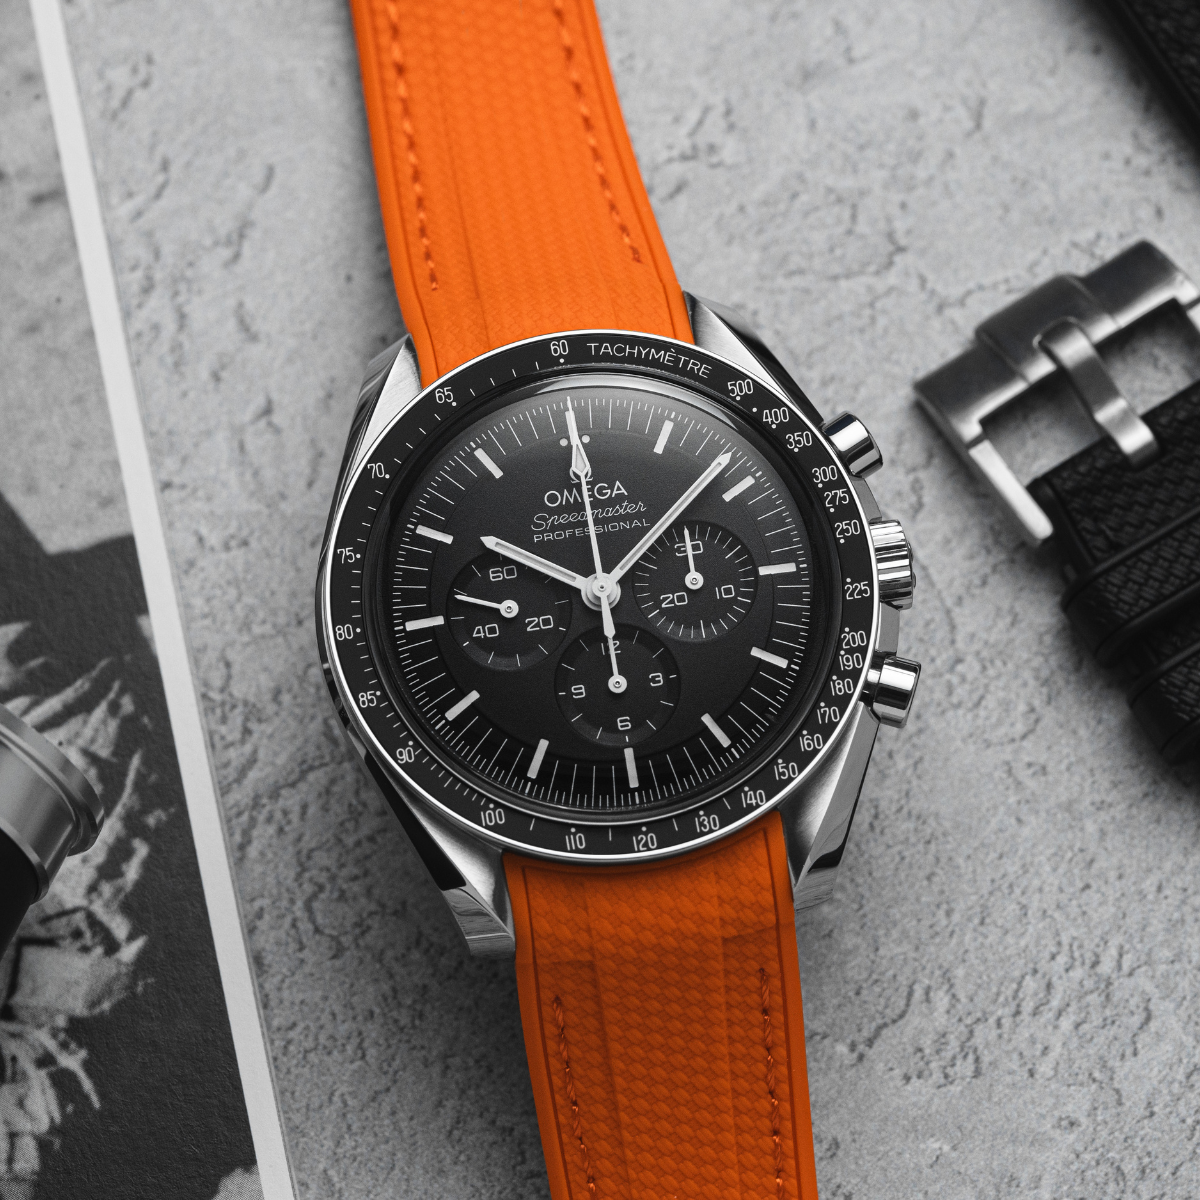 Textured Curved End Premium Silicone Strap - Compatible with Omega Seamaster - Orange with White Stitch (2405)